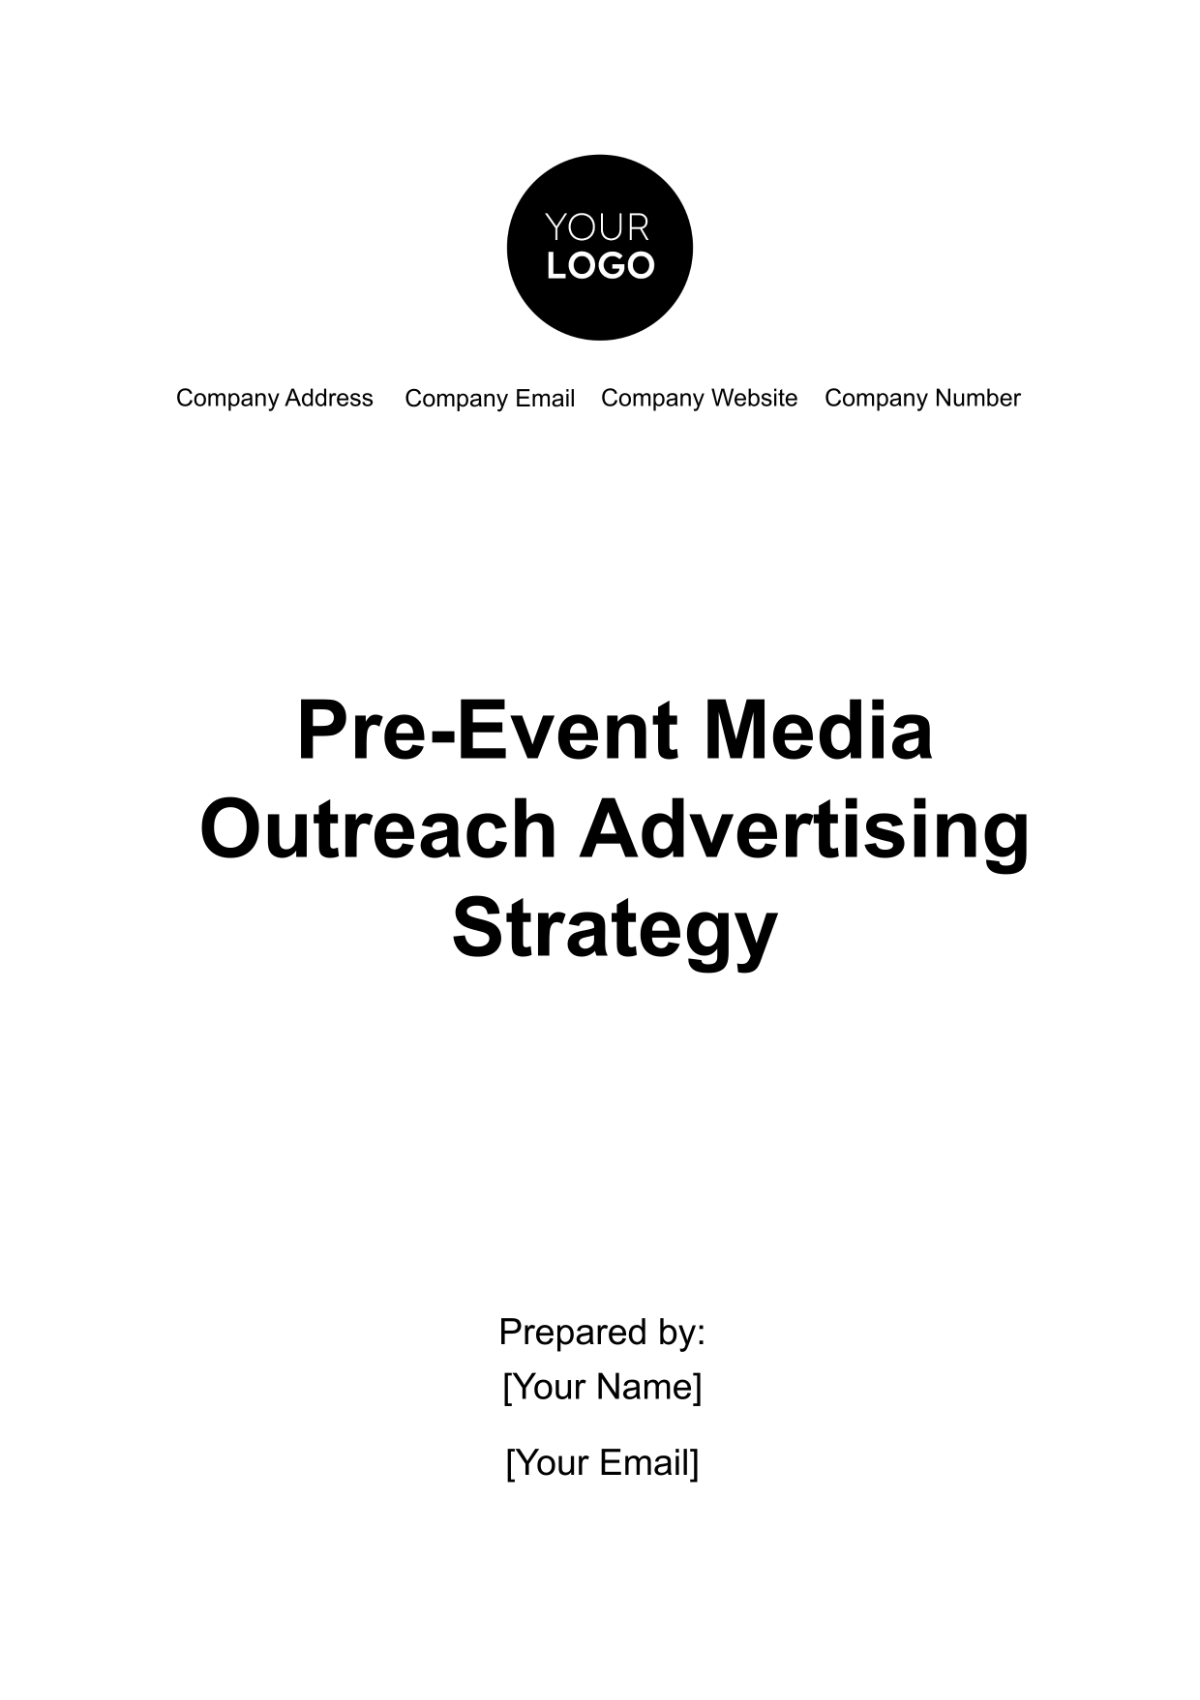 Pre-Event Media Outreach Advertising Strategy Template